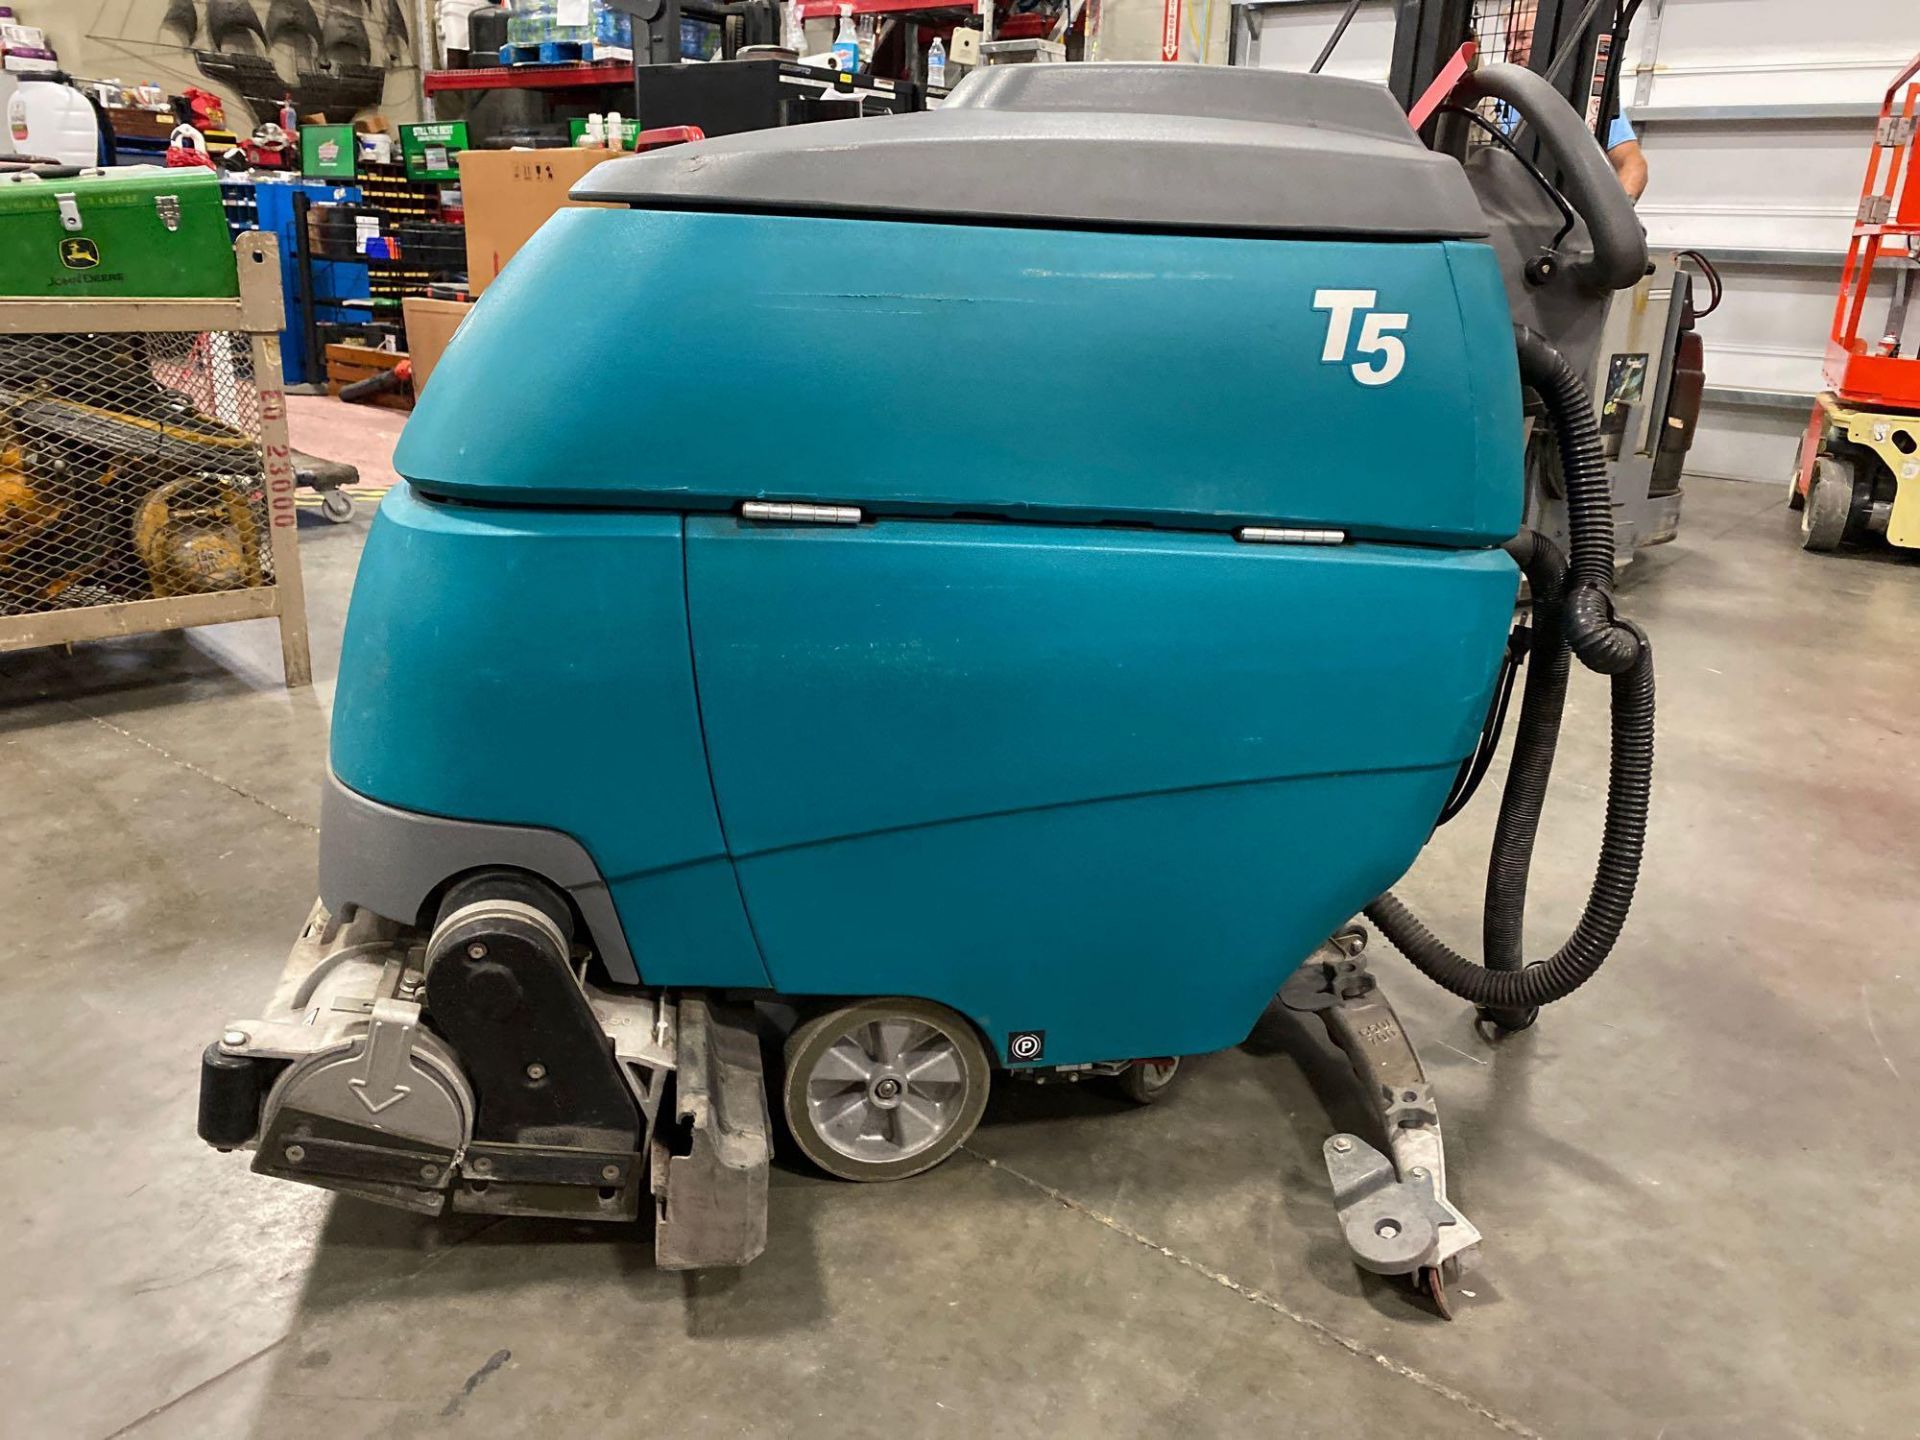 TENNANT T5 FLOOR SCRUBBER, BUILT IN BATTERY CHARGER, RUNS & OPERATES - Image 4 of 22